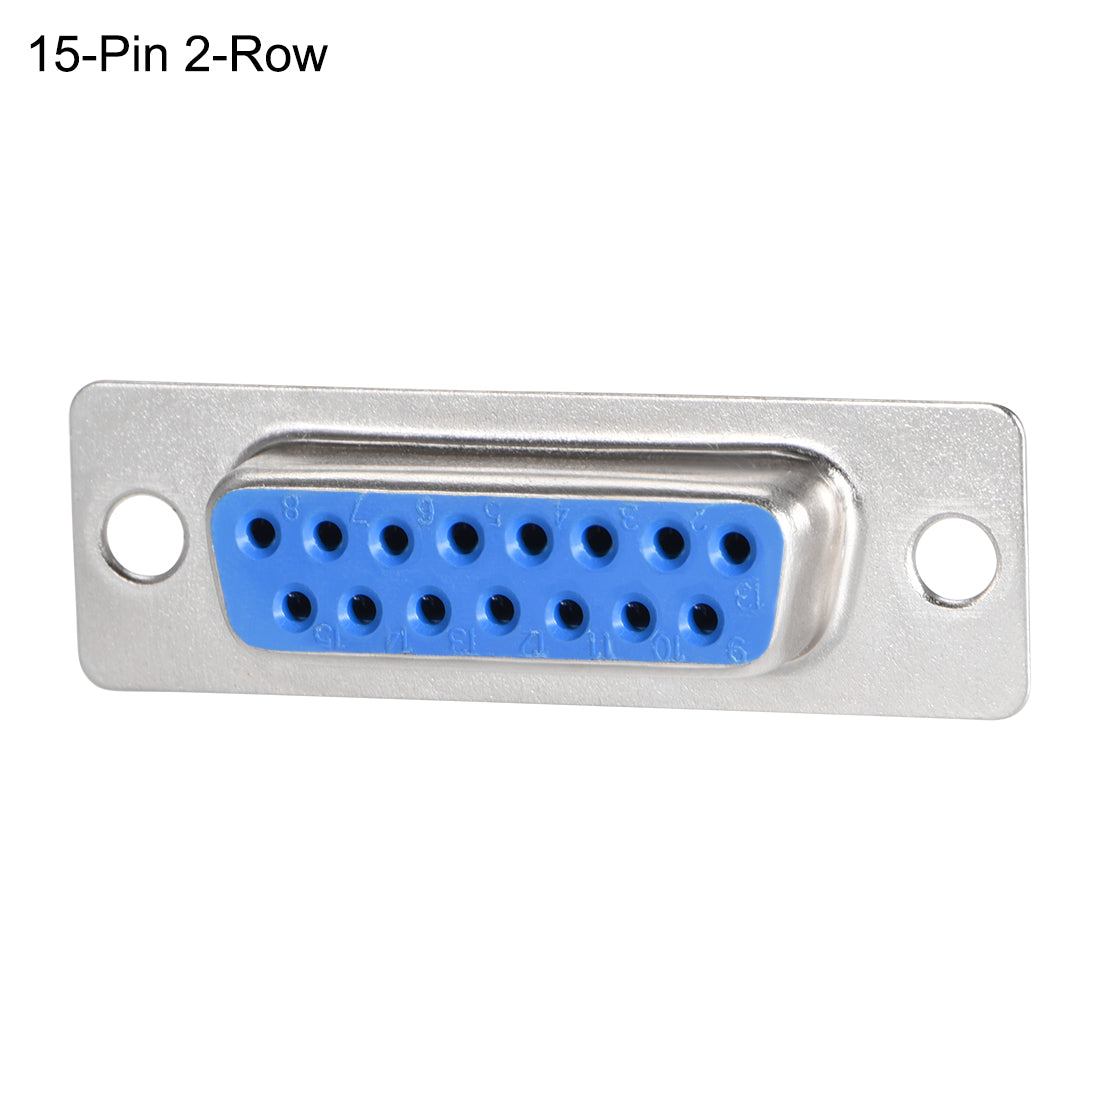 uxcell Uxcell D-sub Connector DB15 Female Socket 15-pin 2-row Port Terminal Breakout for Mechanical Equipment CNC Computers Blue 1pc